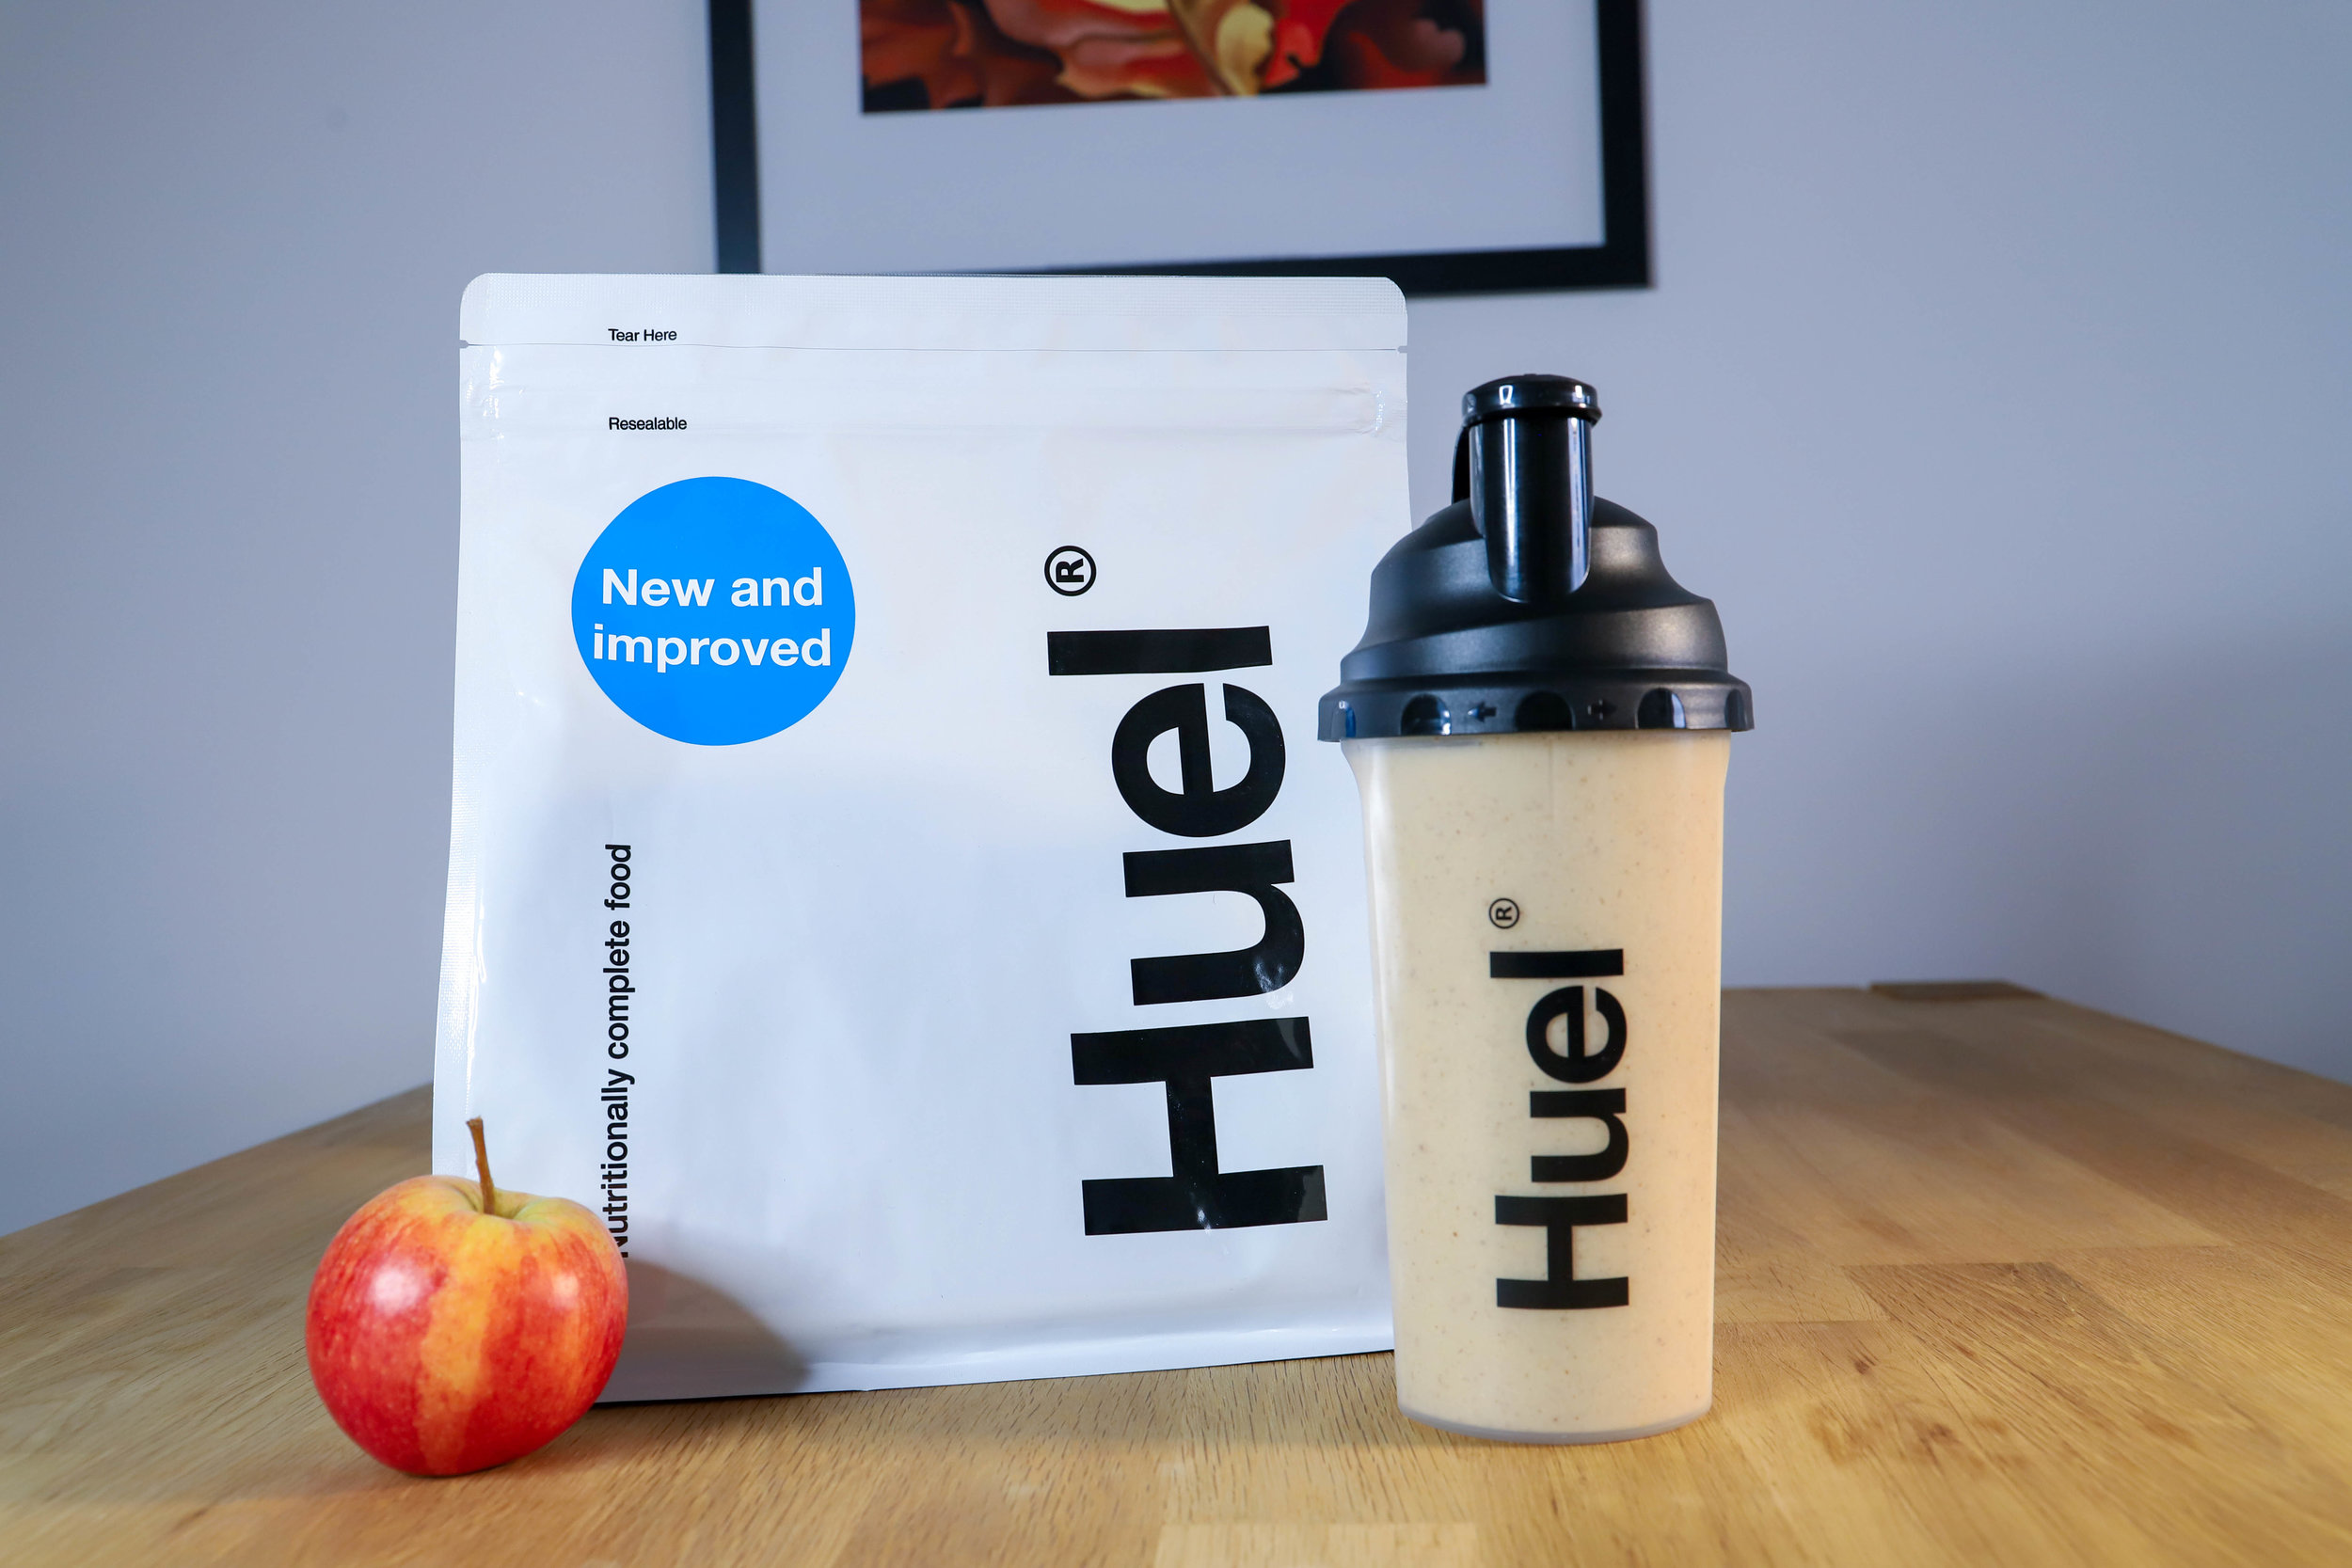 Huel Review - 8 Reasons You Need to Try It — The Opposite Travellers